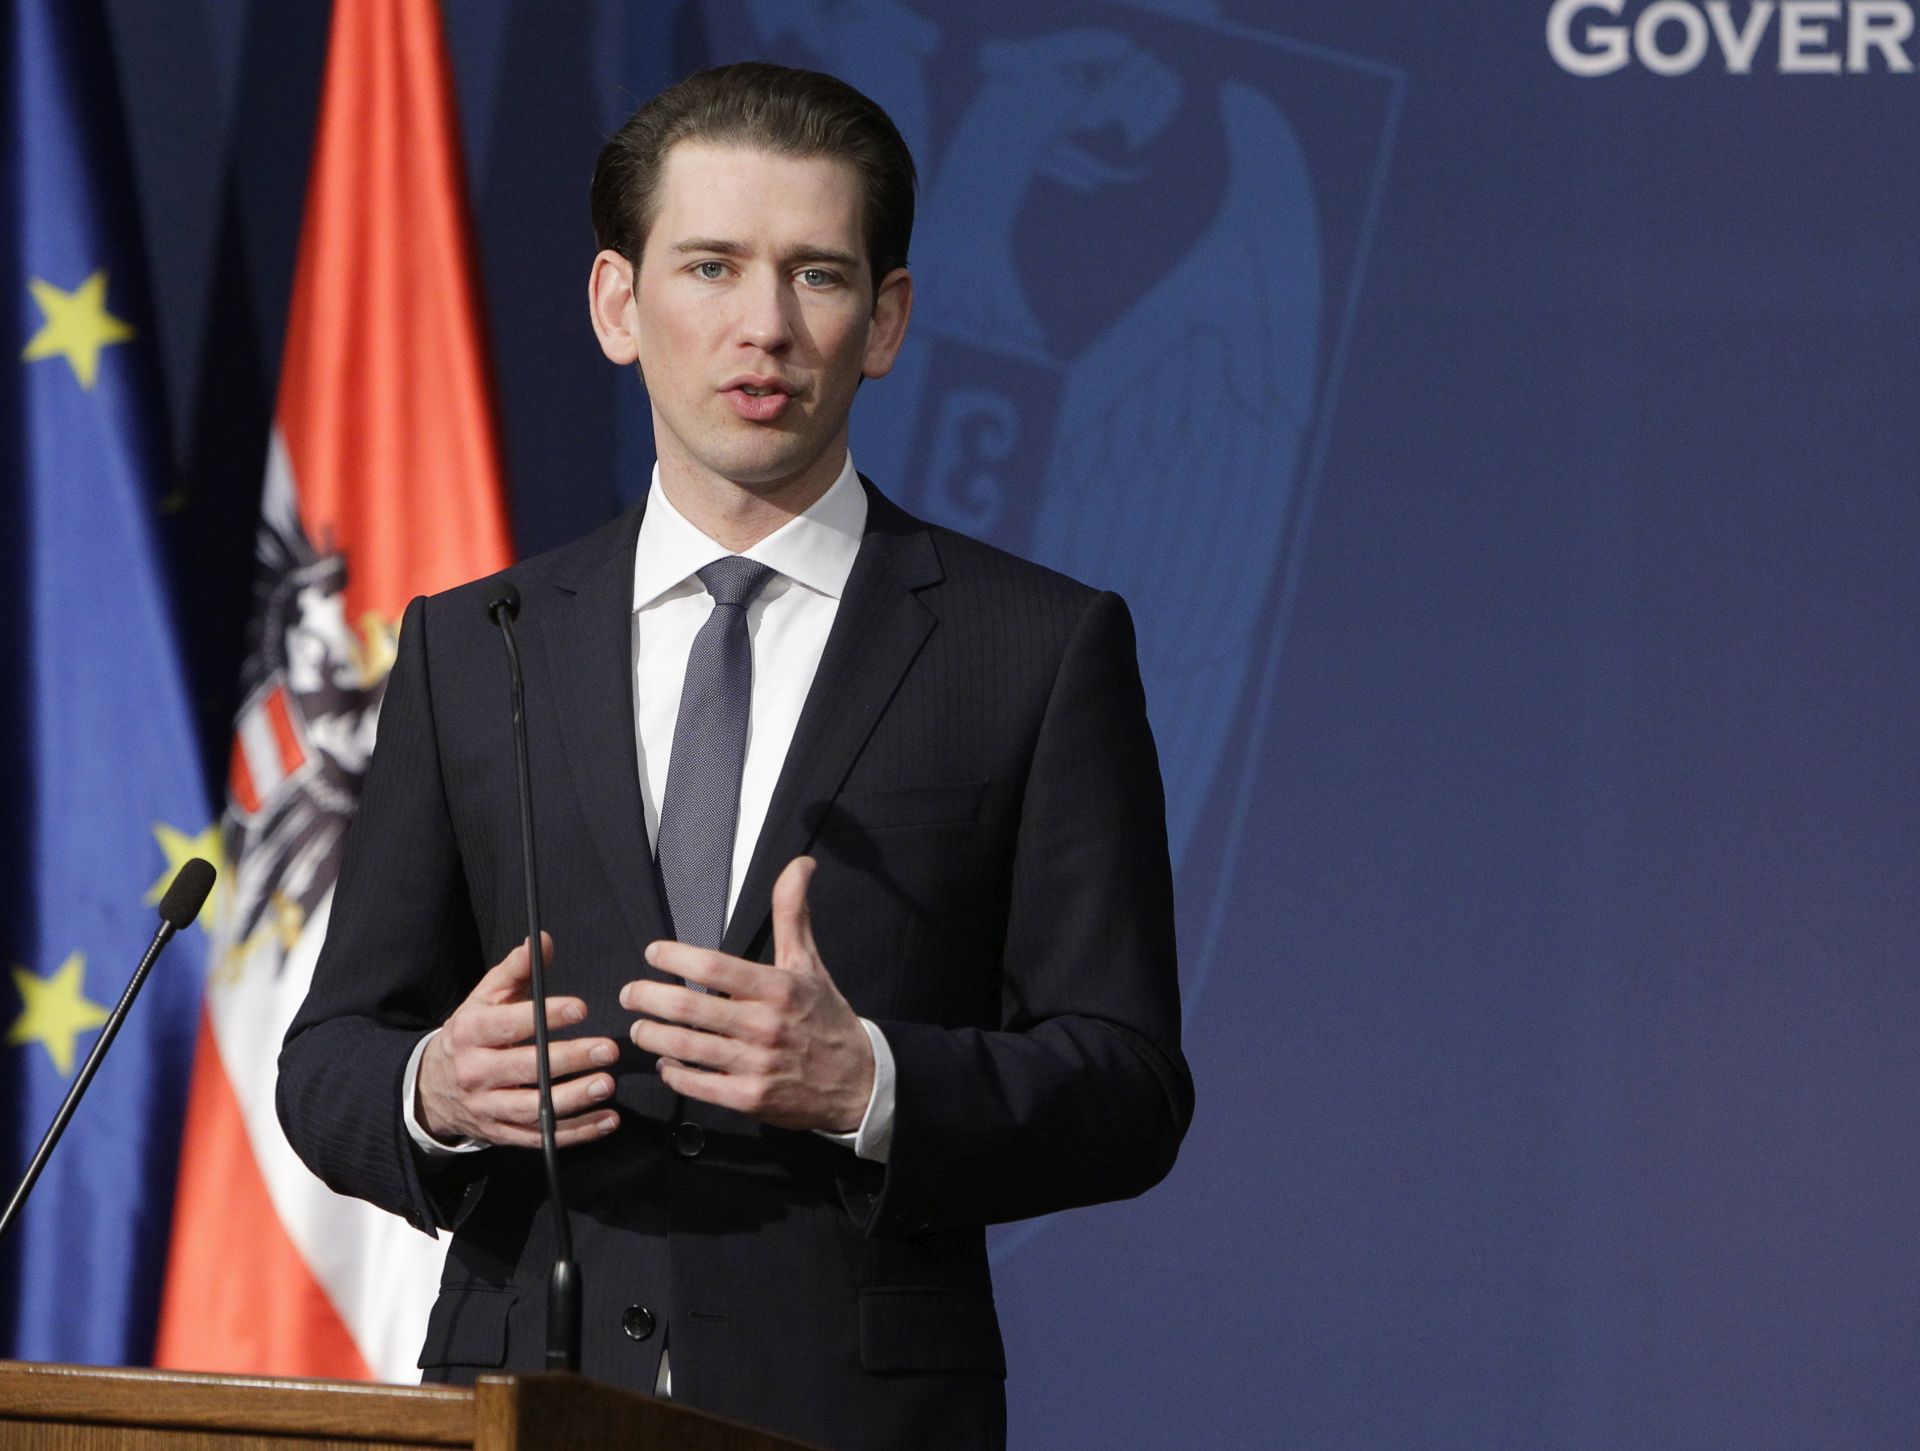 epa05791065 Austrian foreign minister Sebastian Kurz gestures during a press conference with Serbian prime minister Aleksandar Vucic (not pictured) after their meeting in Belgrade, Serbia, 13 February 2017. Kurz is on a official visit to Serbia.  EPA/ANDREJ CUKIC